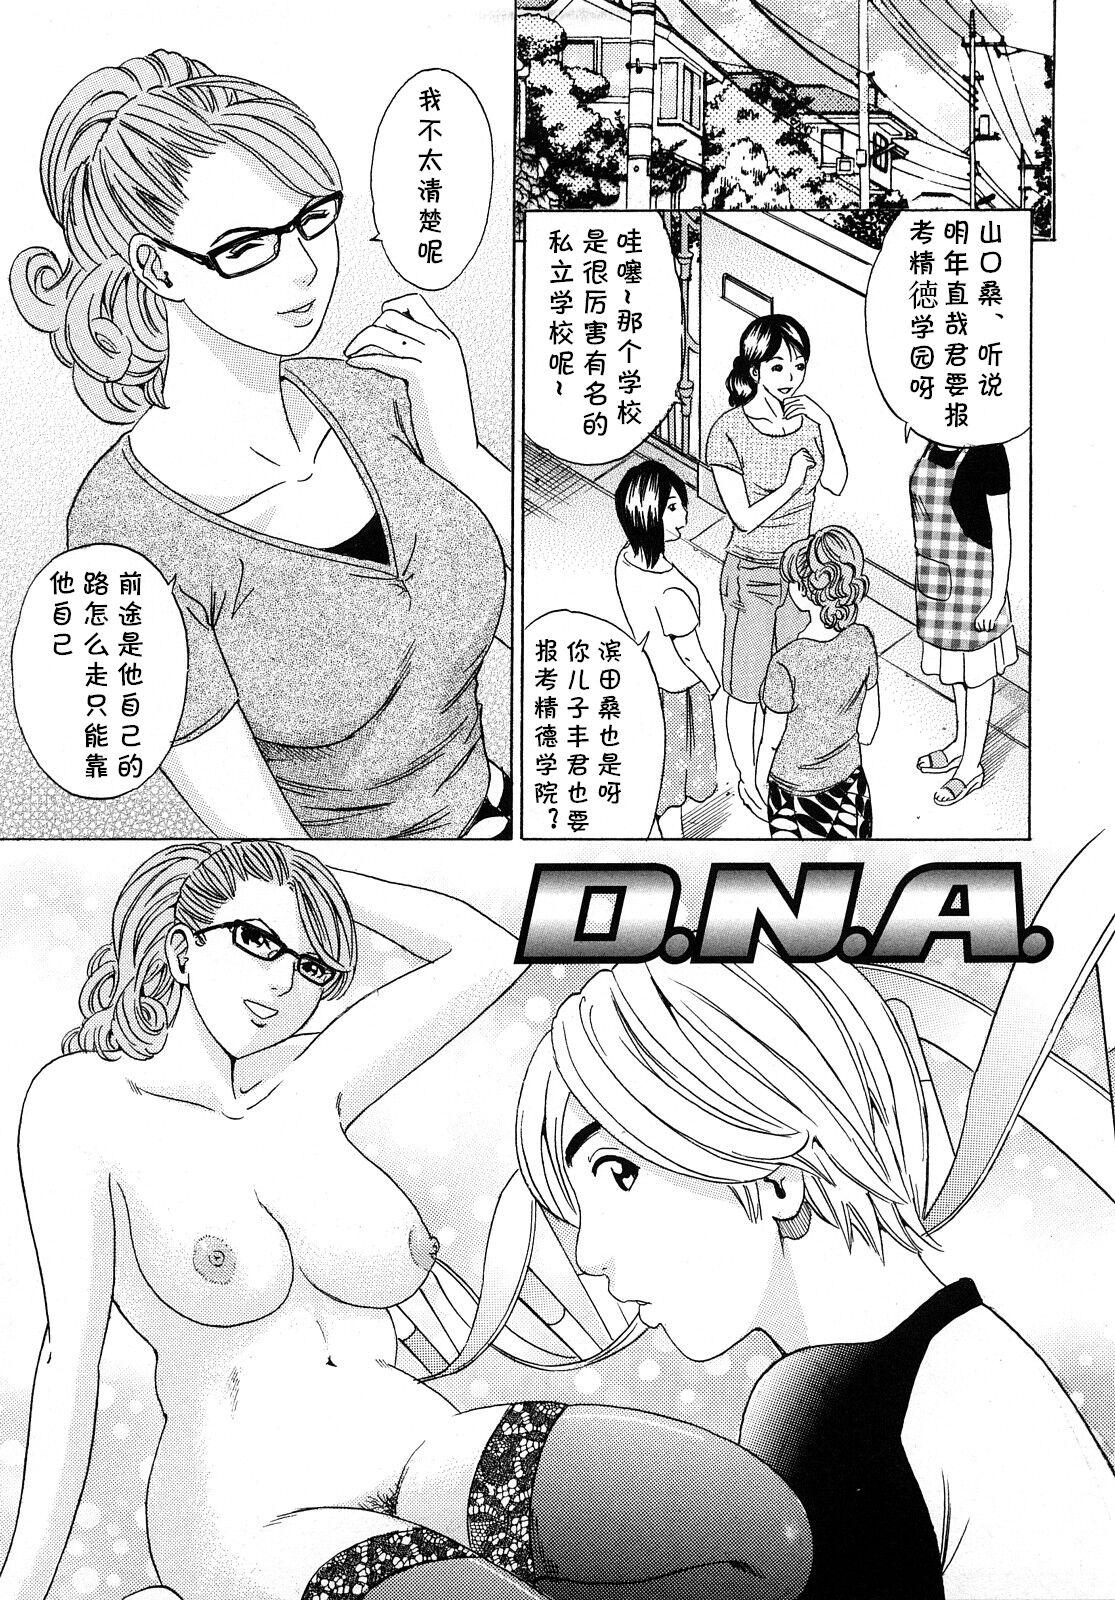 Penetration D.N.A. Missionary - Page 1